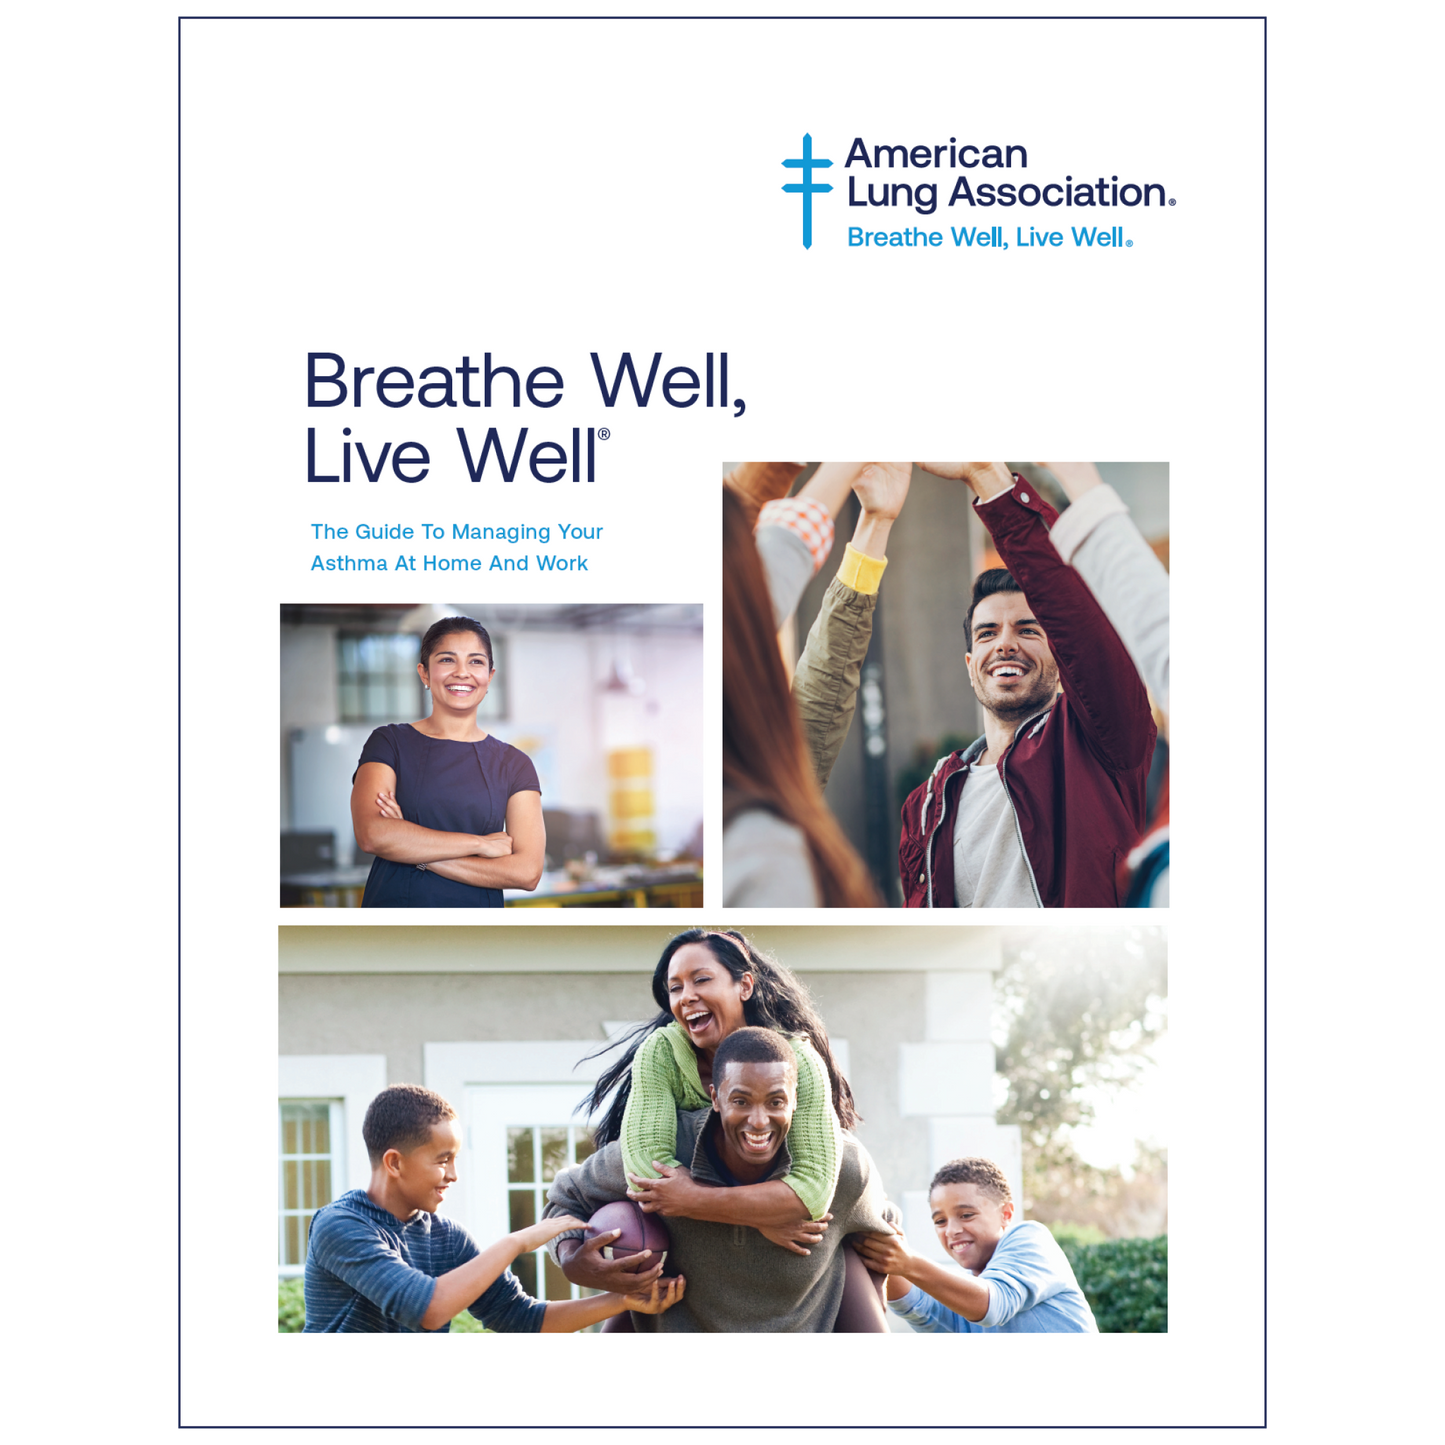 Breathe Well, Live Well: The Guide to Managing Your Asthma at Home and Work